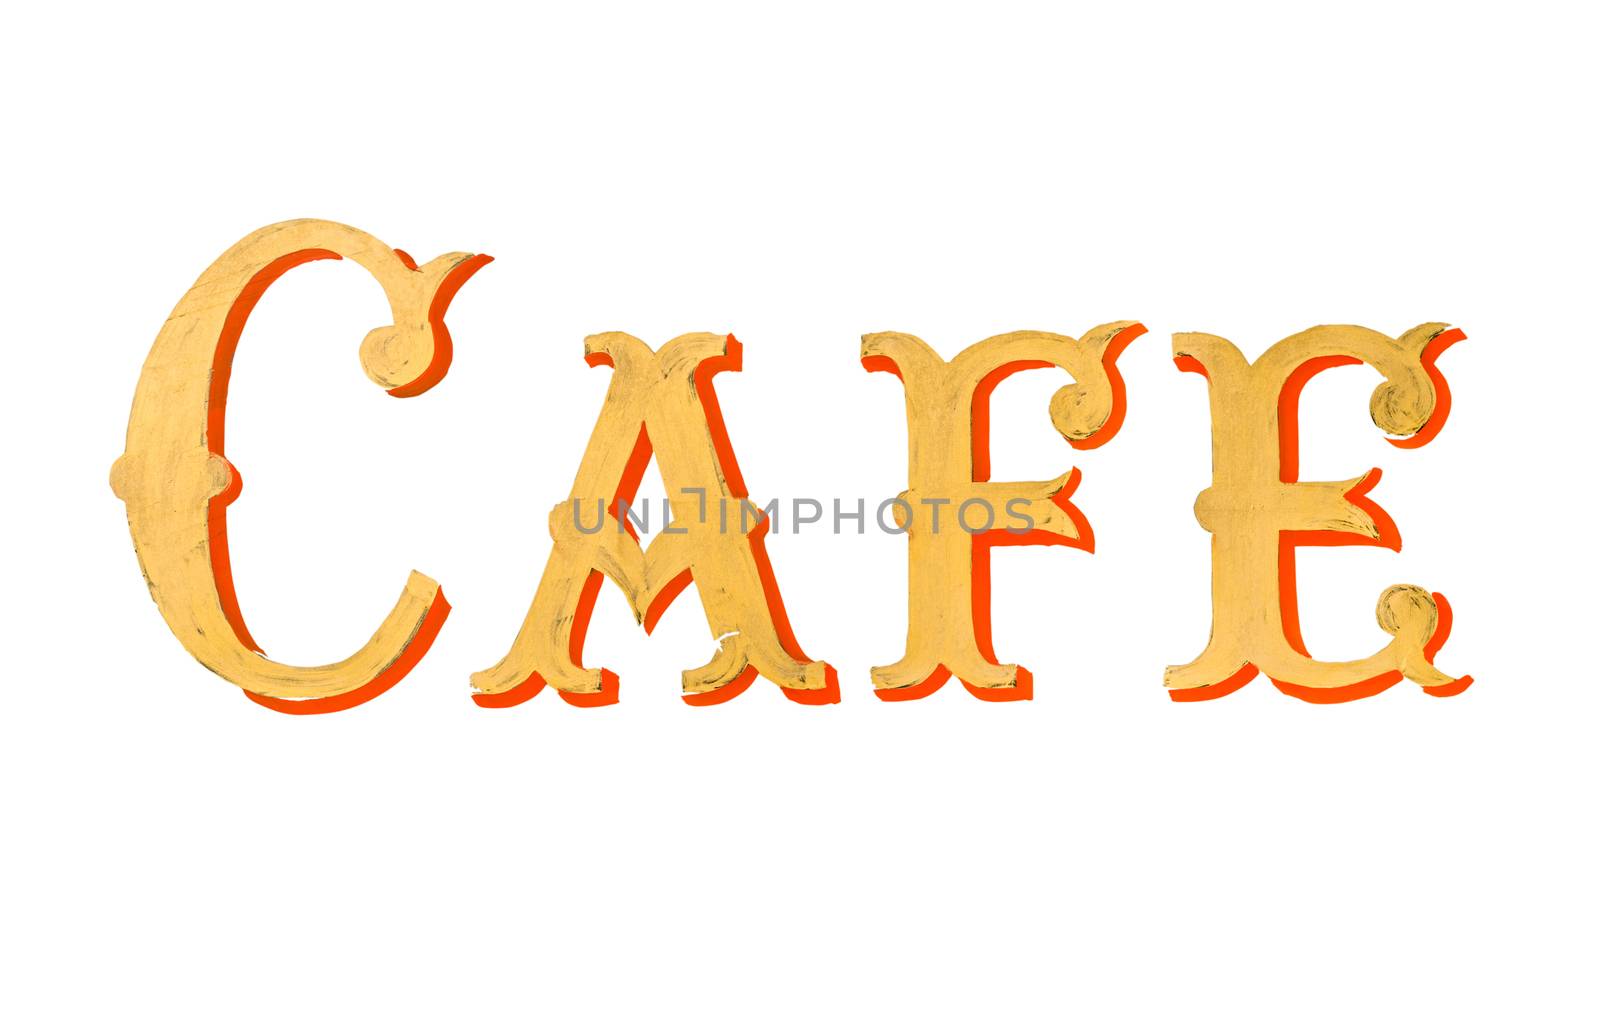 Isolated Vintage Retro Painted Cafe Sign On A White Background